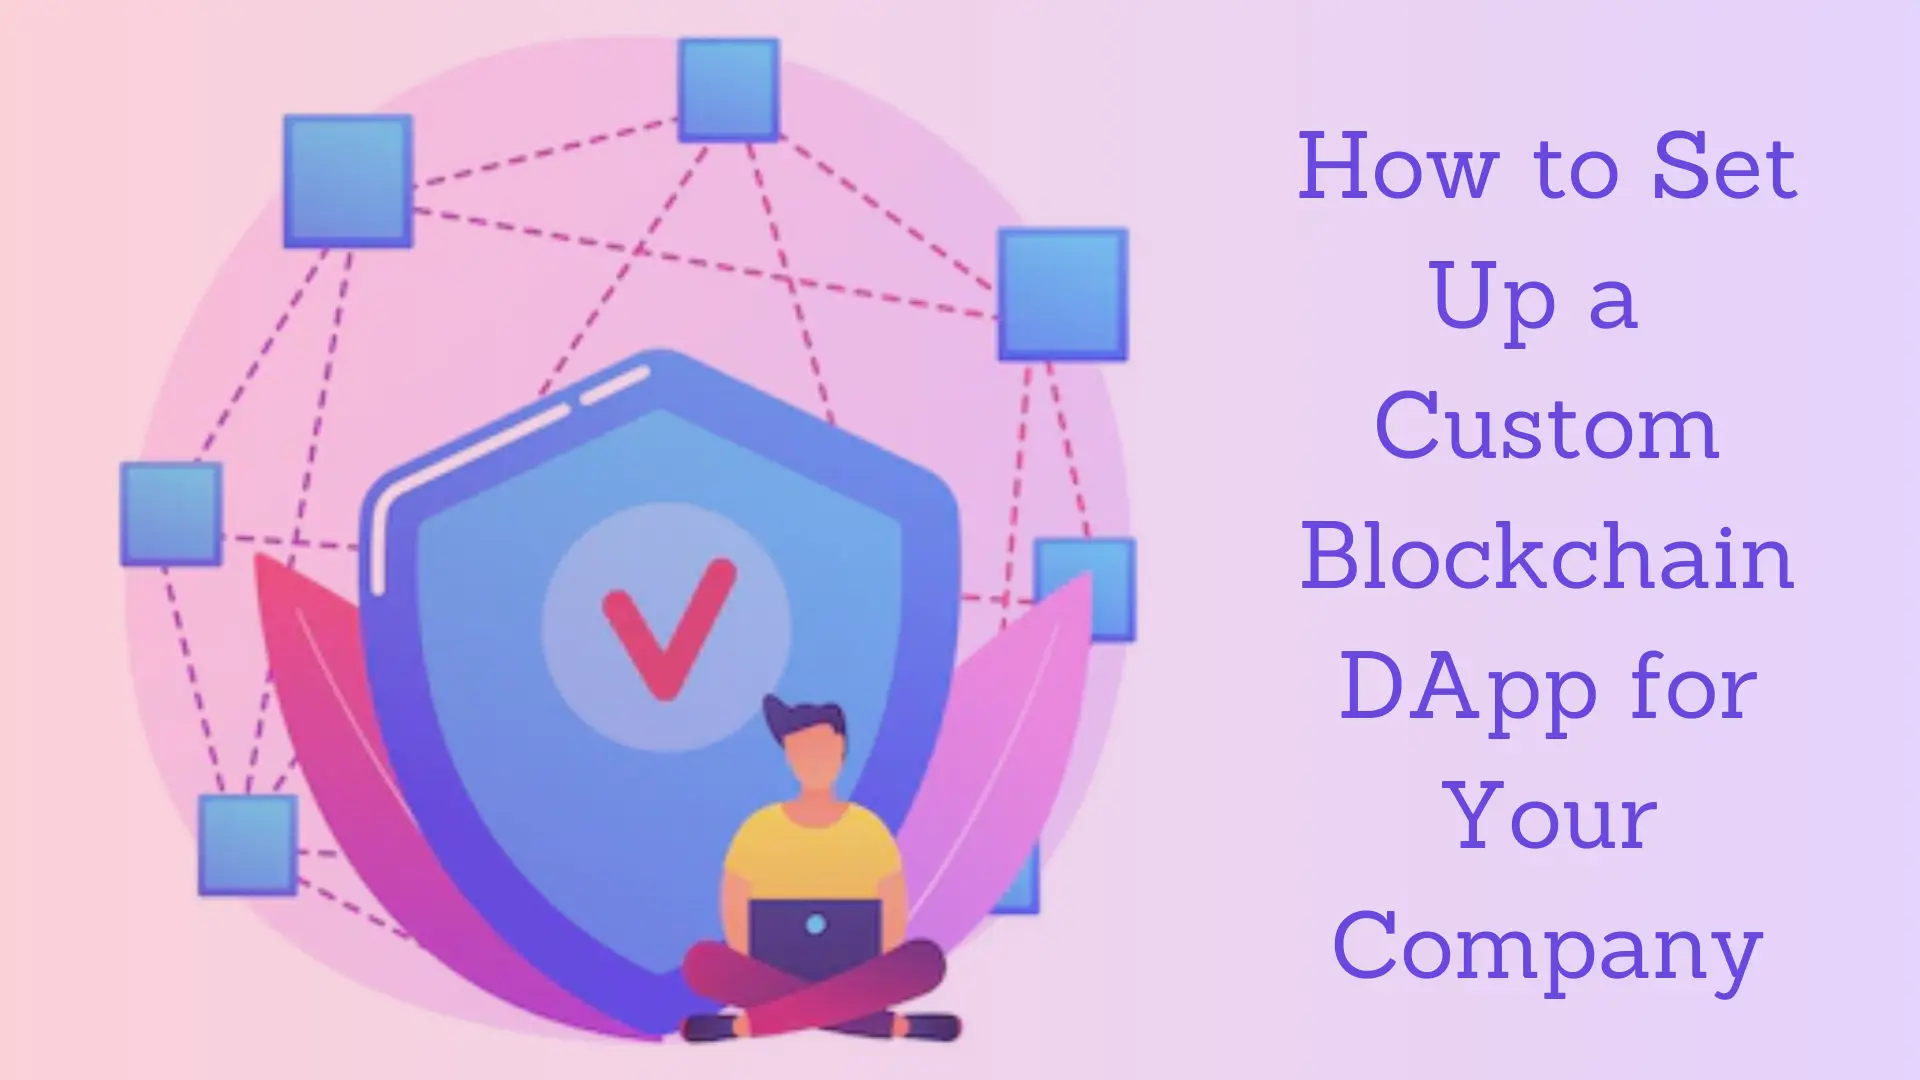 How to Set Up a Custom Blockchain DApp for Your Company